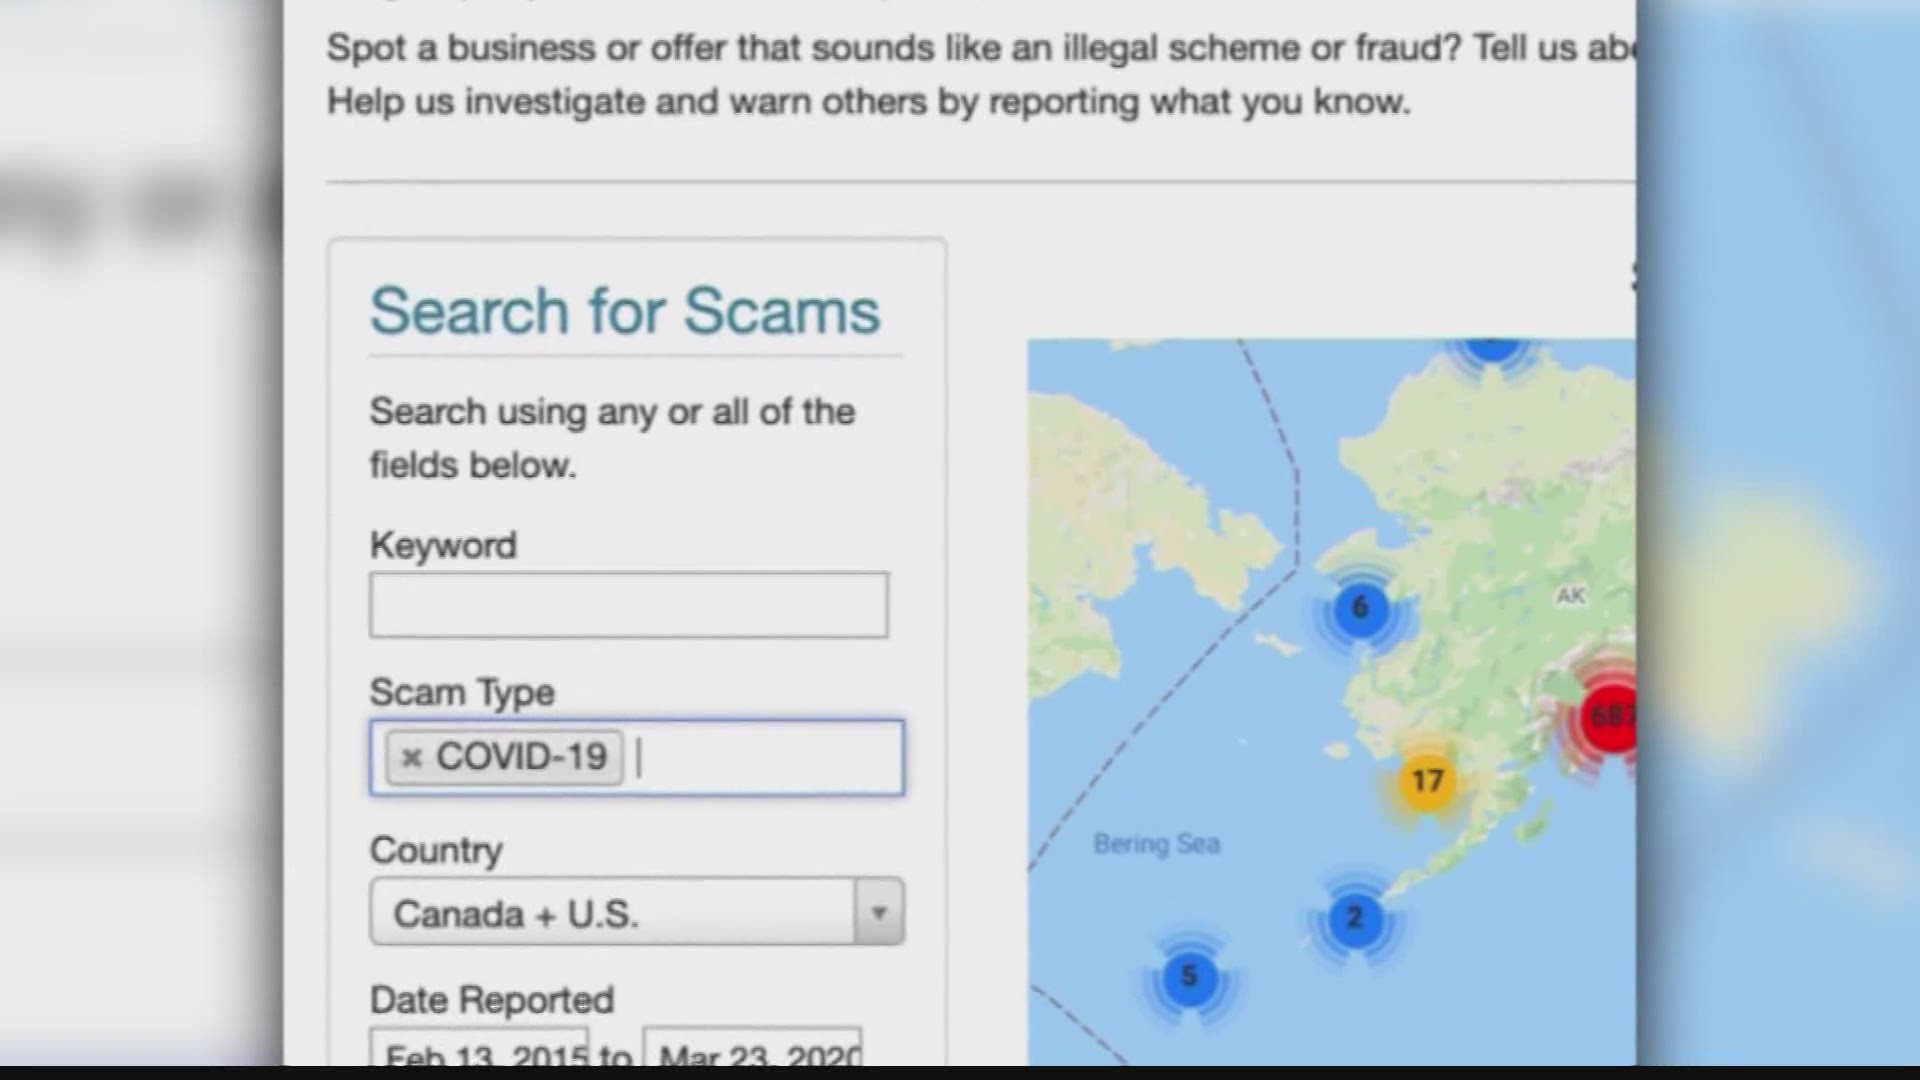 Even during a global pandemic, scammers are out to get unsuspecting victims.